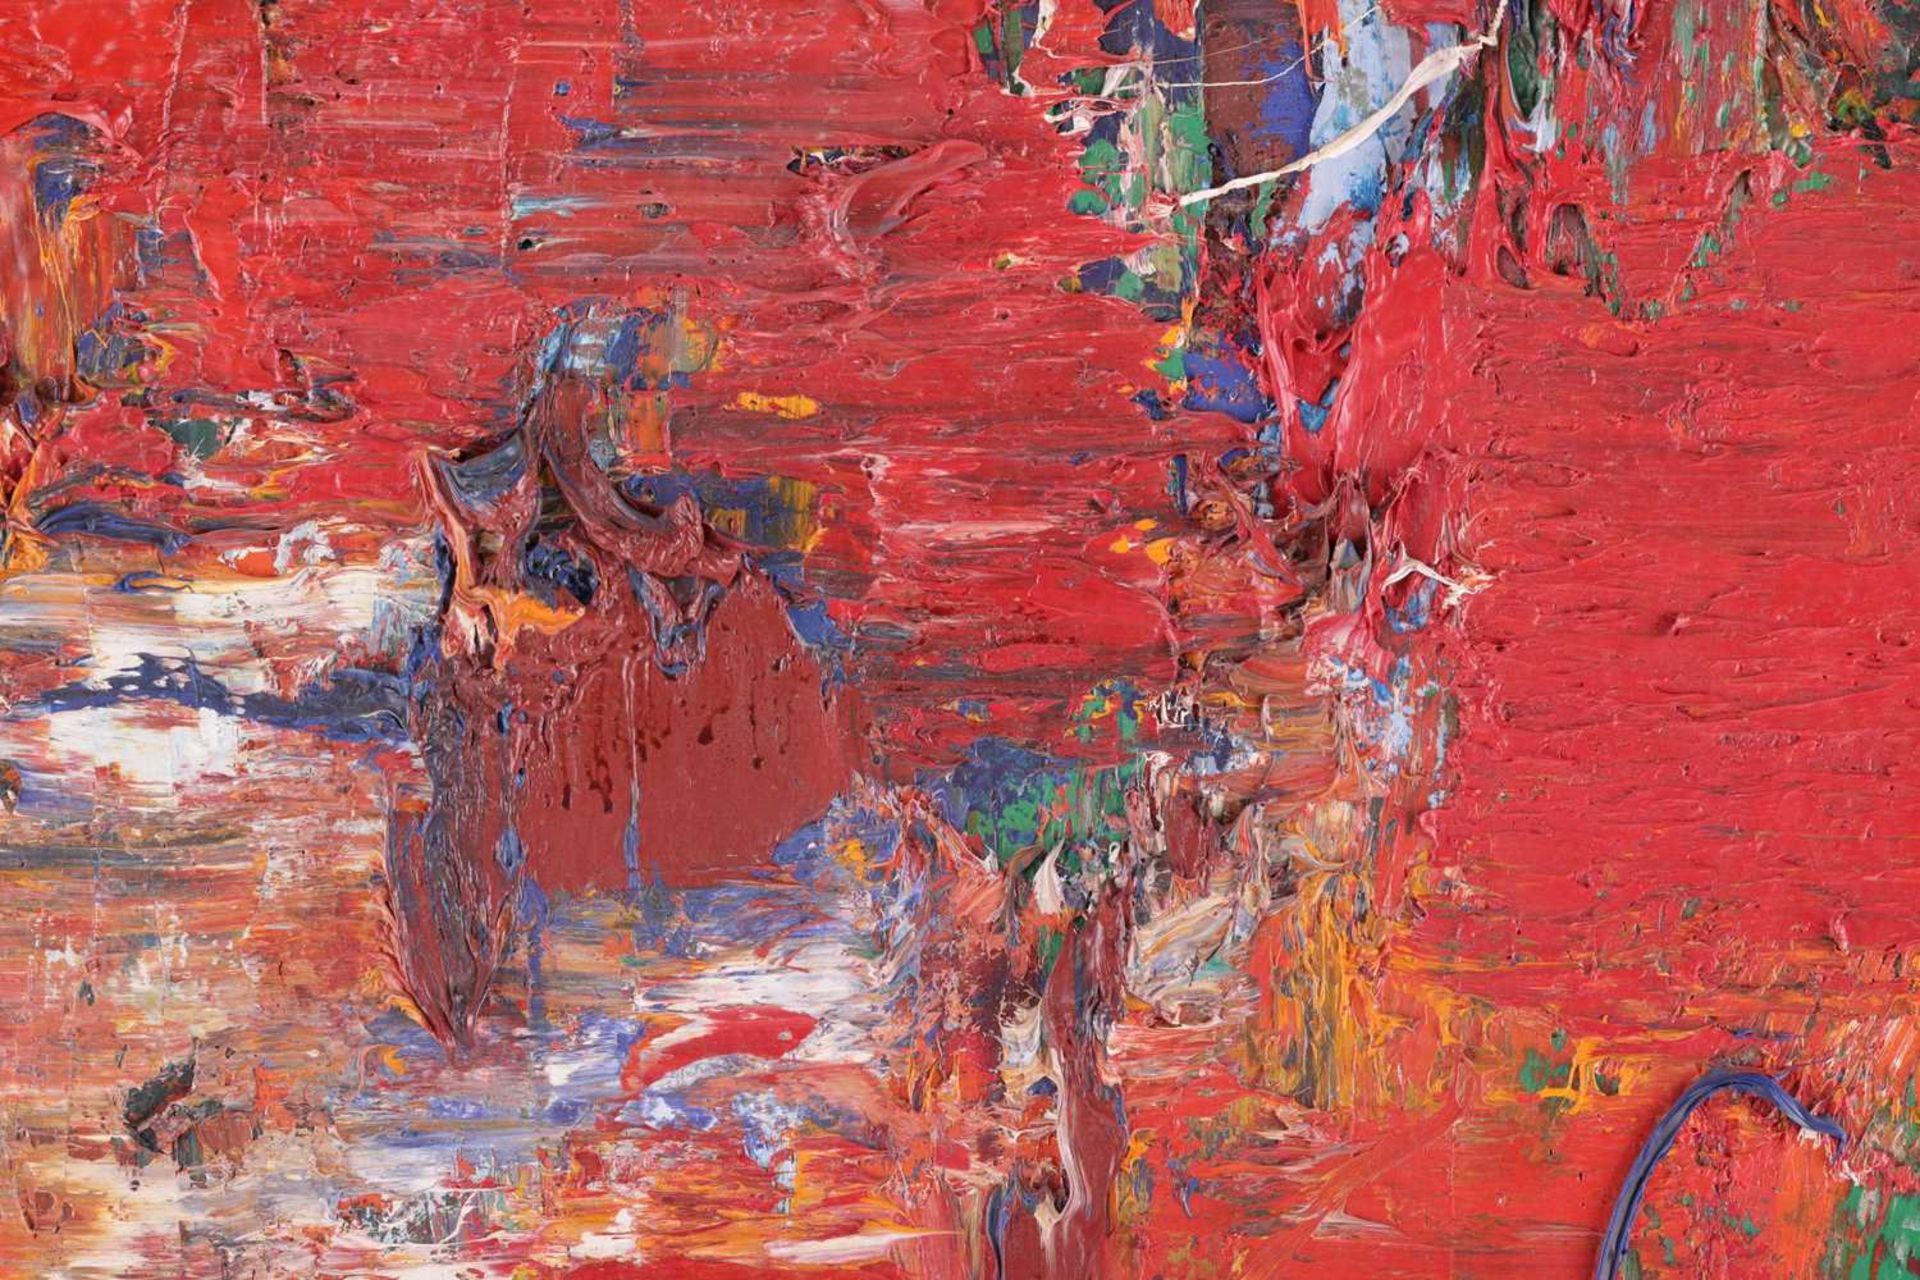 Martyn Brewster (b. 1952), 'Red Painting' (1988), signed 'Martin Brewster' and titled on the reverse - Image 2 of 7